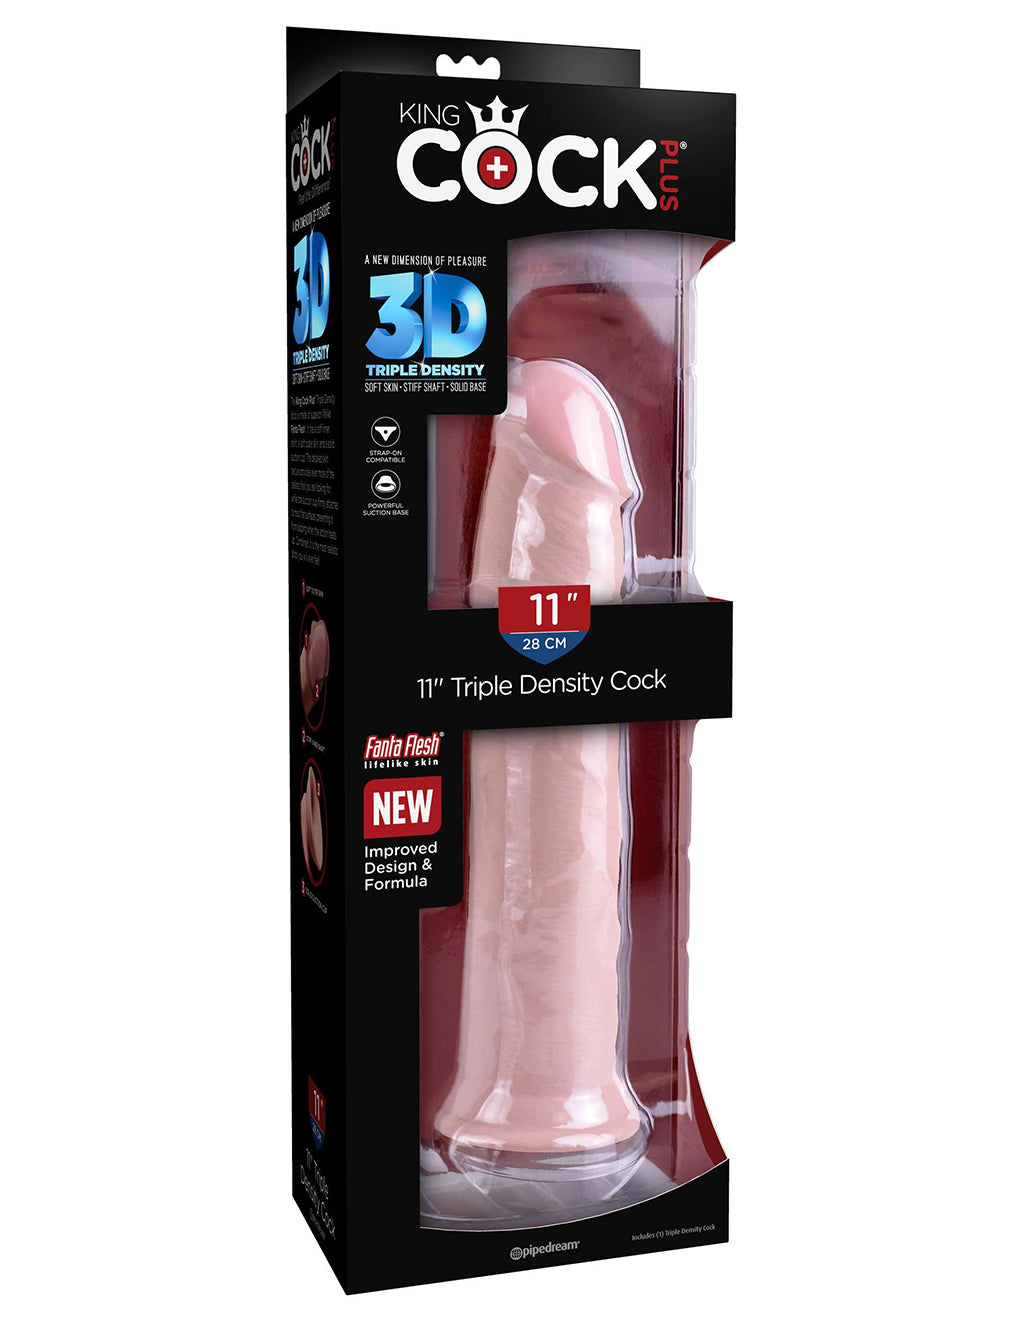 King Cock Plus 11" 3D Cock- Package